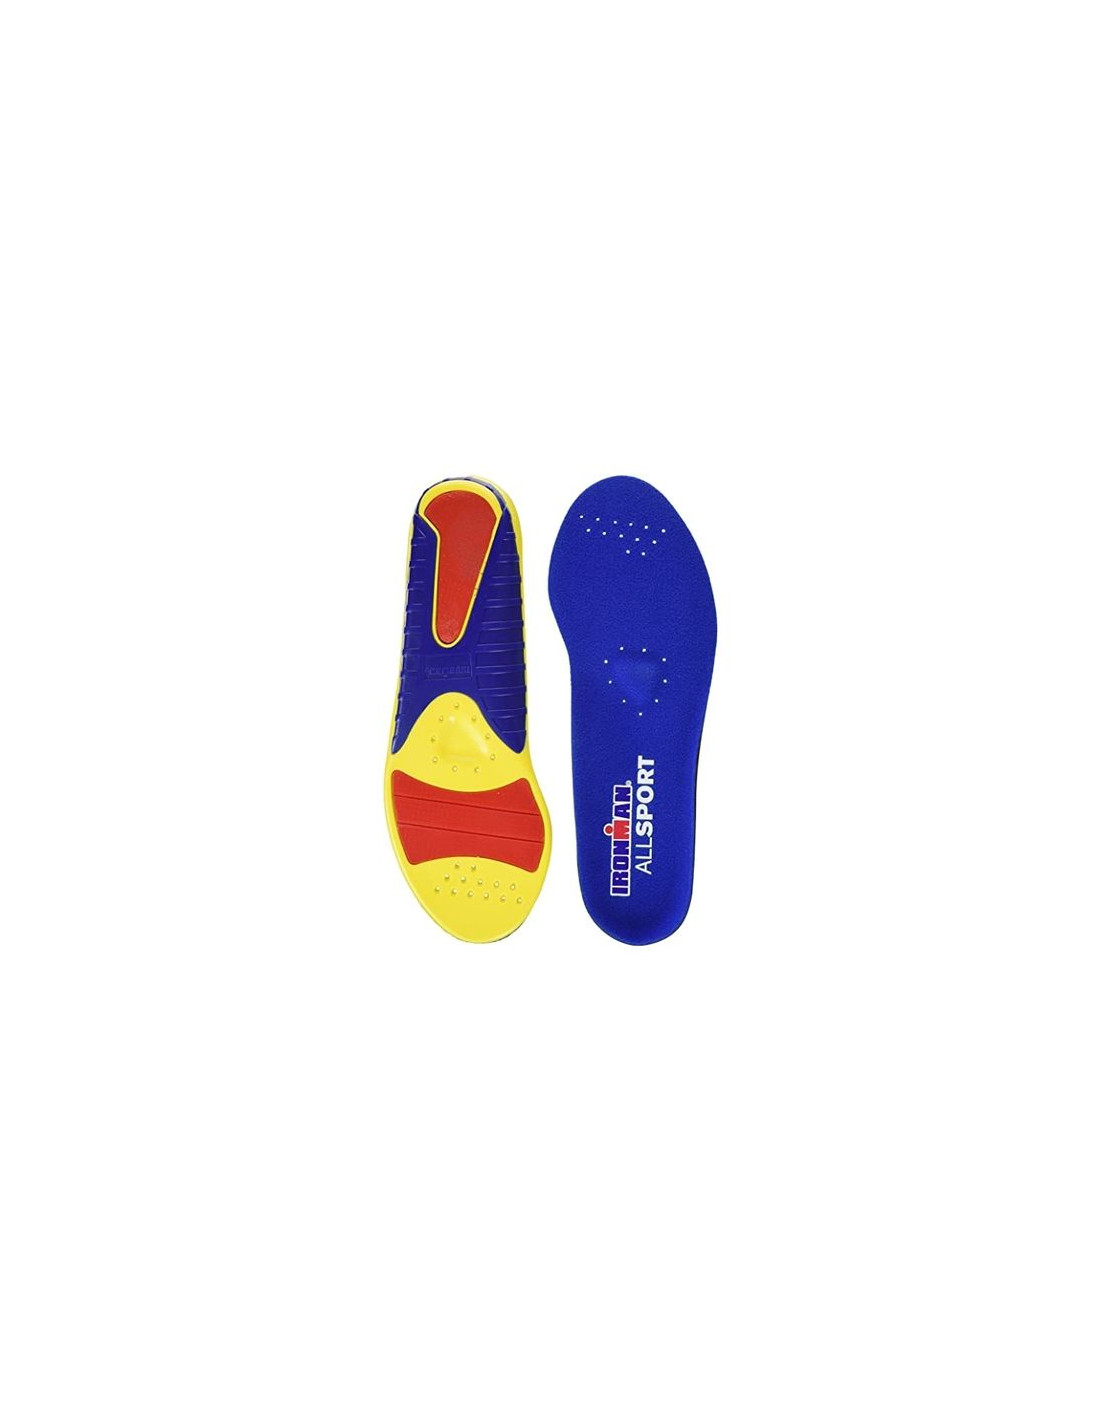 ALL SPORT INSOLE